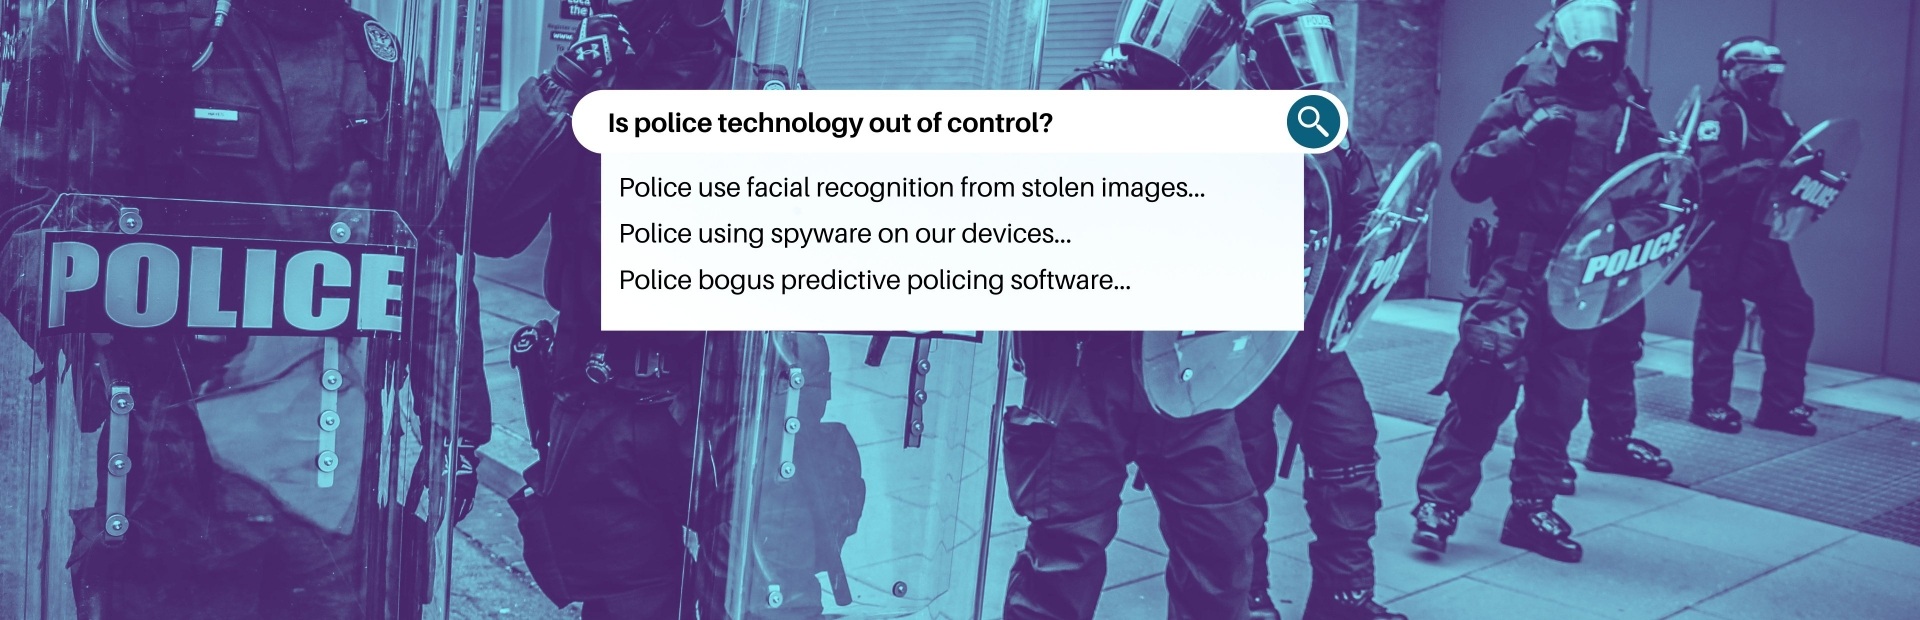 More oversight of police technology is badly needed to protect people in Canada. 